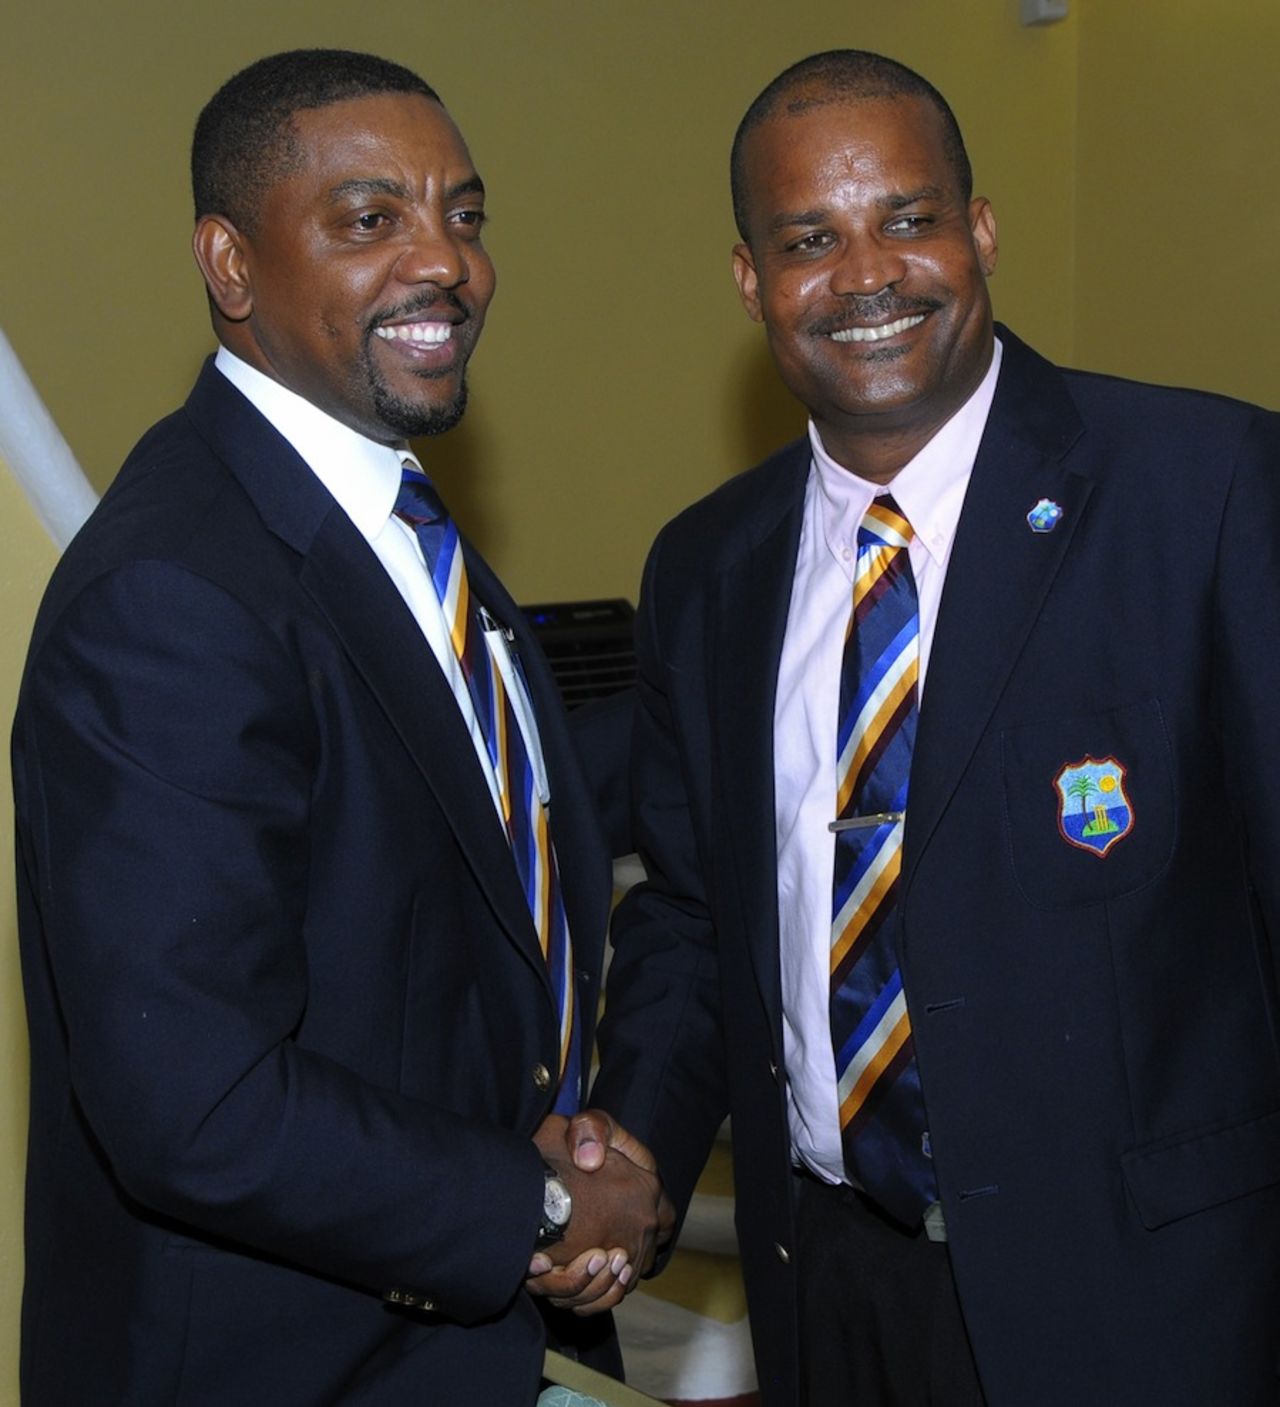 Whycliffe 'Dave' Cameron (left) and Emmanuel Nanthan, the WICB's new president and vice-president